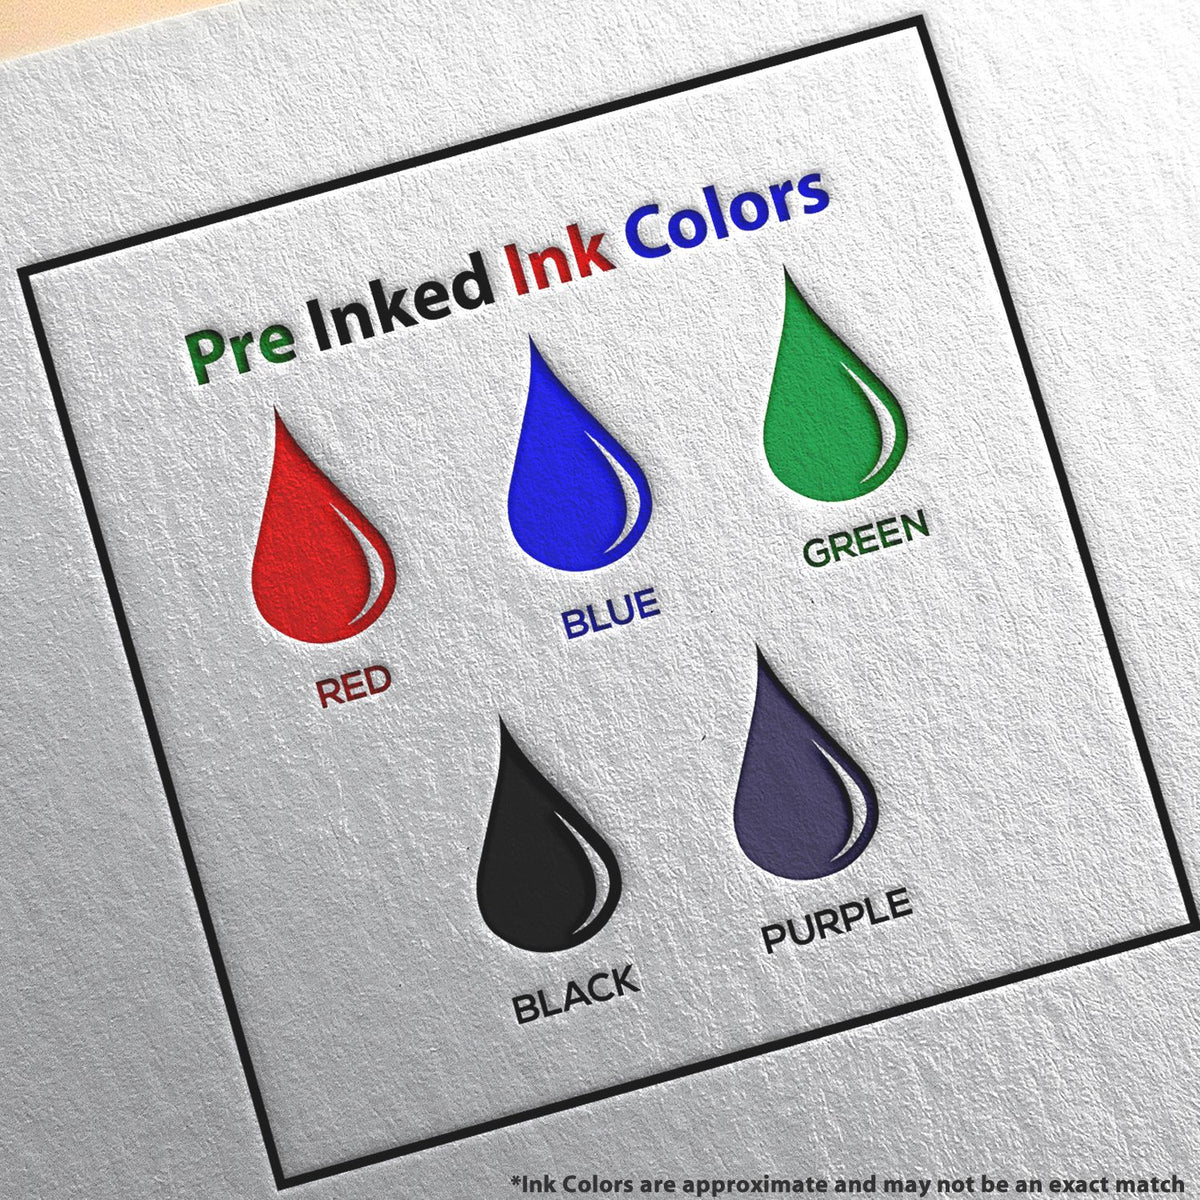 A picture showing the different ink colors or hues available for the Slim Pre-Inked New Jersey Professional Engineer Seal Stamp product.